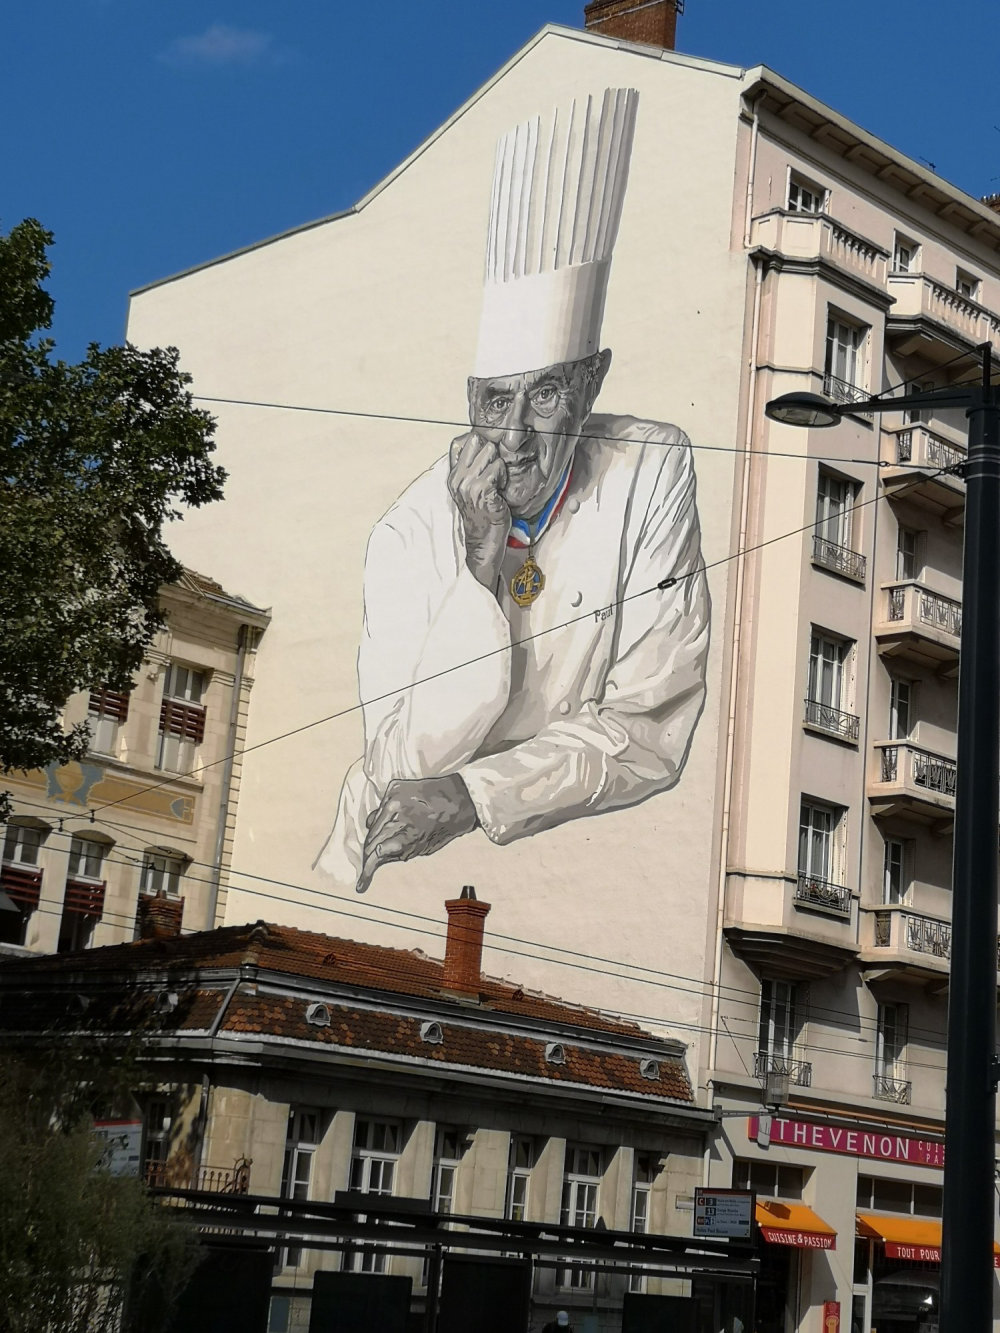 mural in Lyon by artist unknown. Tagged: Paul Bocuse